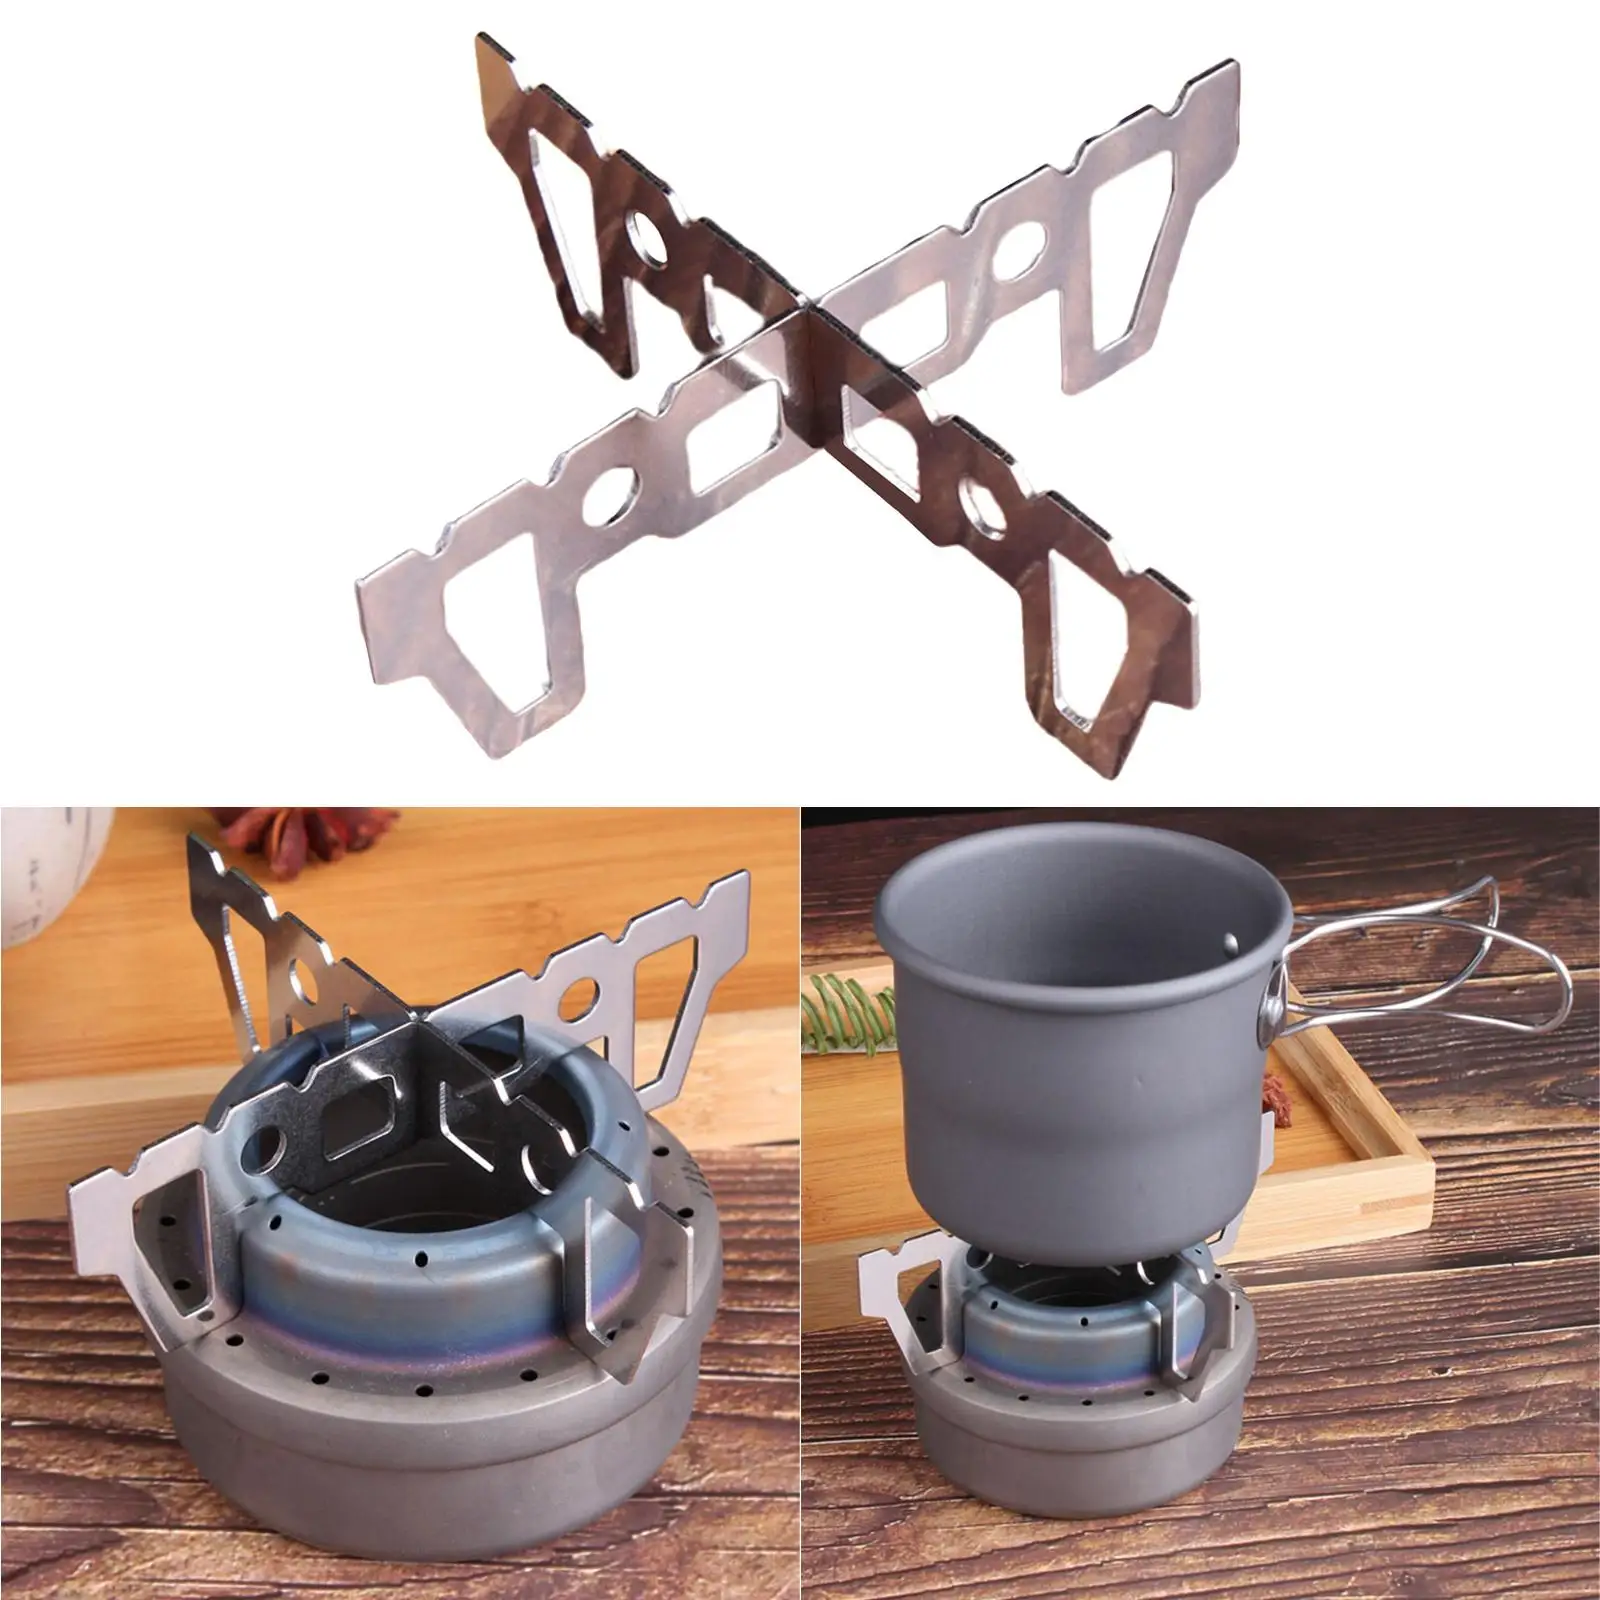 Ti  Stove Stand Portable  Stove Accessories Stand Furnace Core Support #Spirit Burner Outdoor Camping Stove for Cooker Outdoor